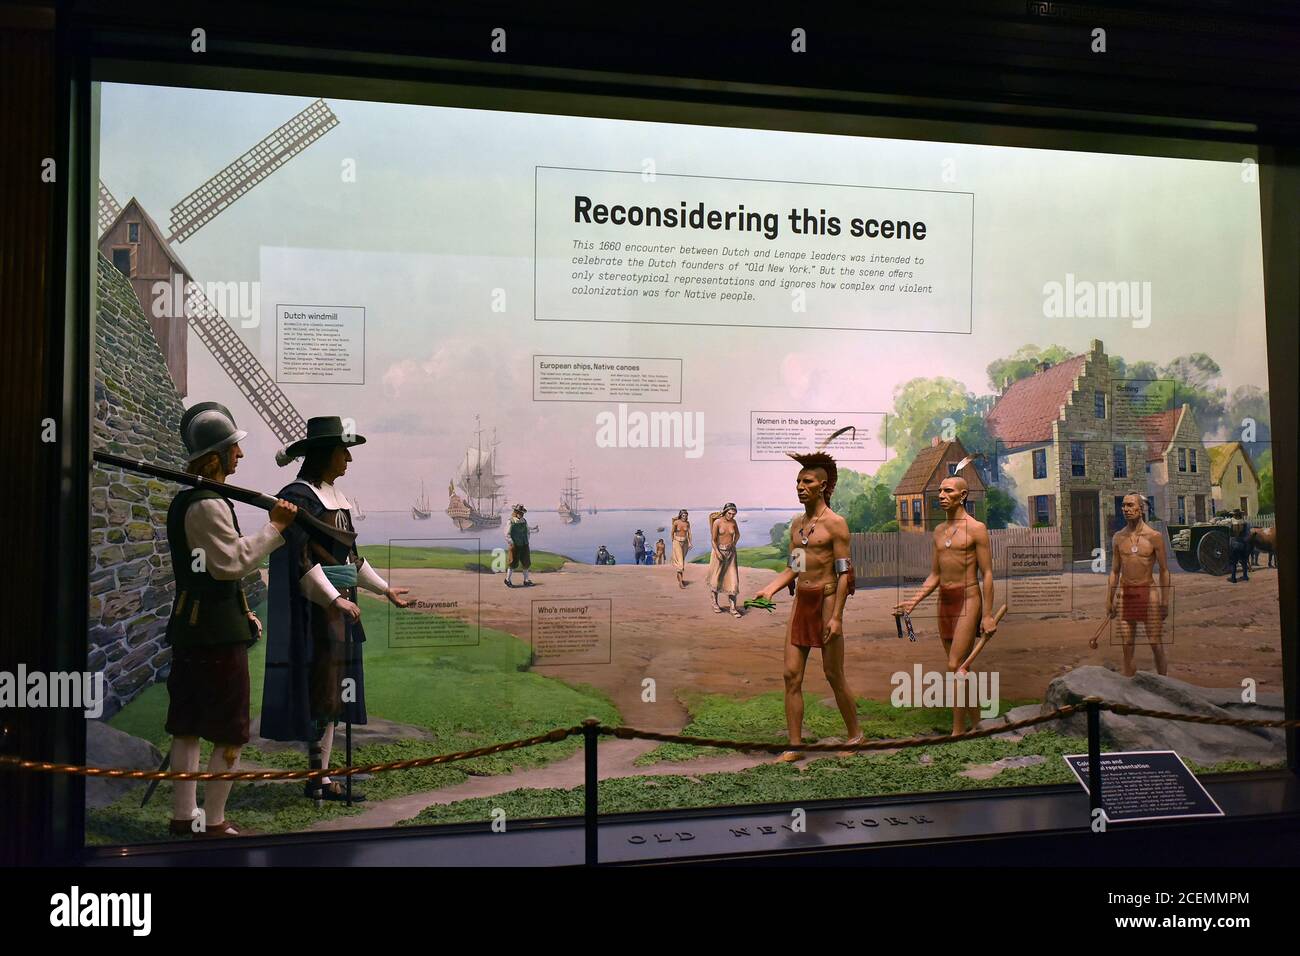 New York City, USA. 01st Sep, 2020. A statement mentioning missing historical information is set on the glass facade of a diorama depicting the encounter between Native Americans and Dutch colonist at the American Museum of Natural History, which is set to open on September 2, after being closed due to the COVID-19 pandemic, New York, NY, September 1, 2020. (Anthony Behar/Sipa USA) Credit: Sipa USA/Alamy Live News Stock Photo